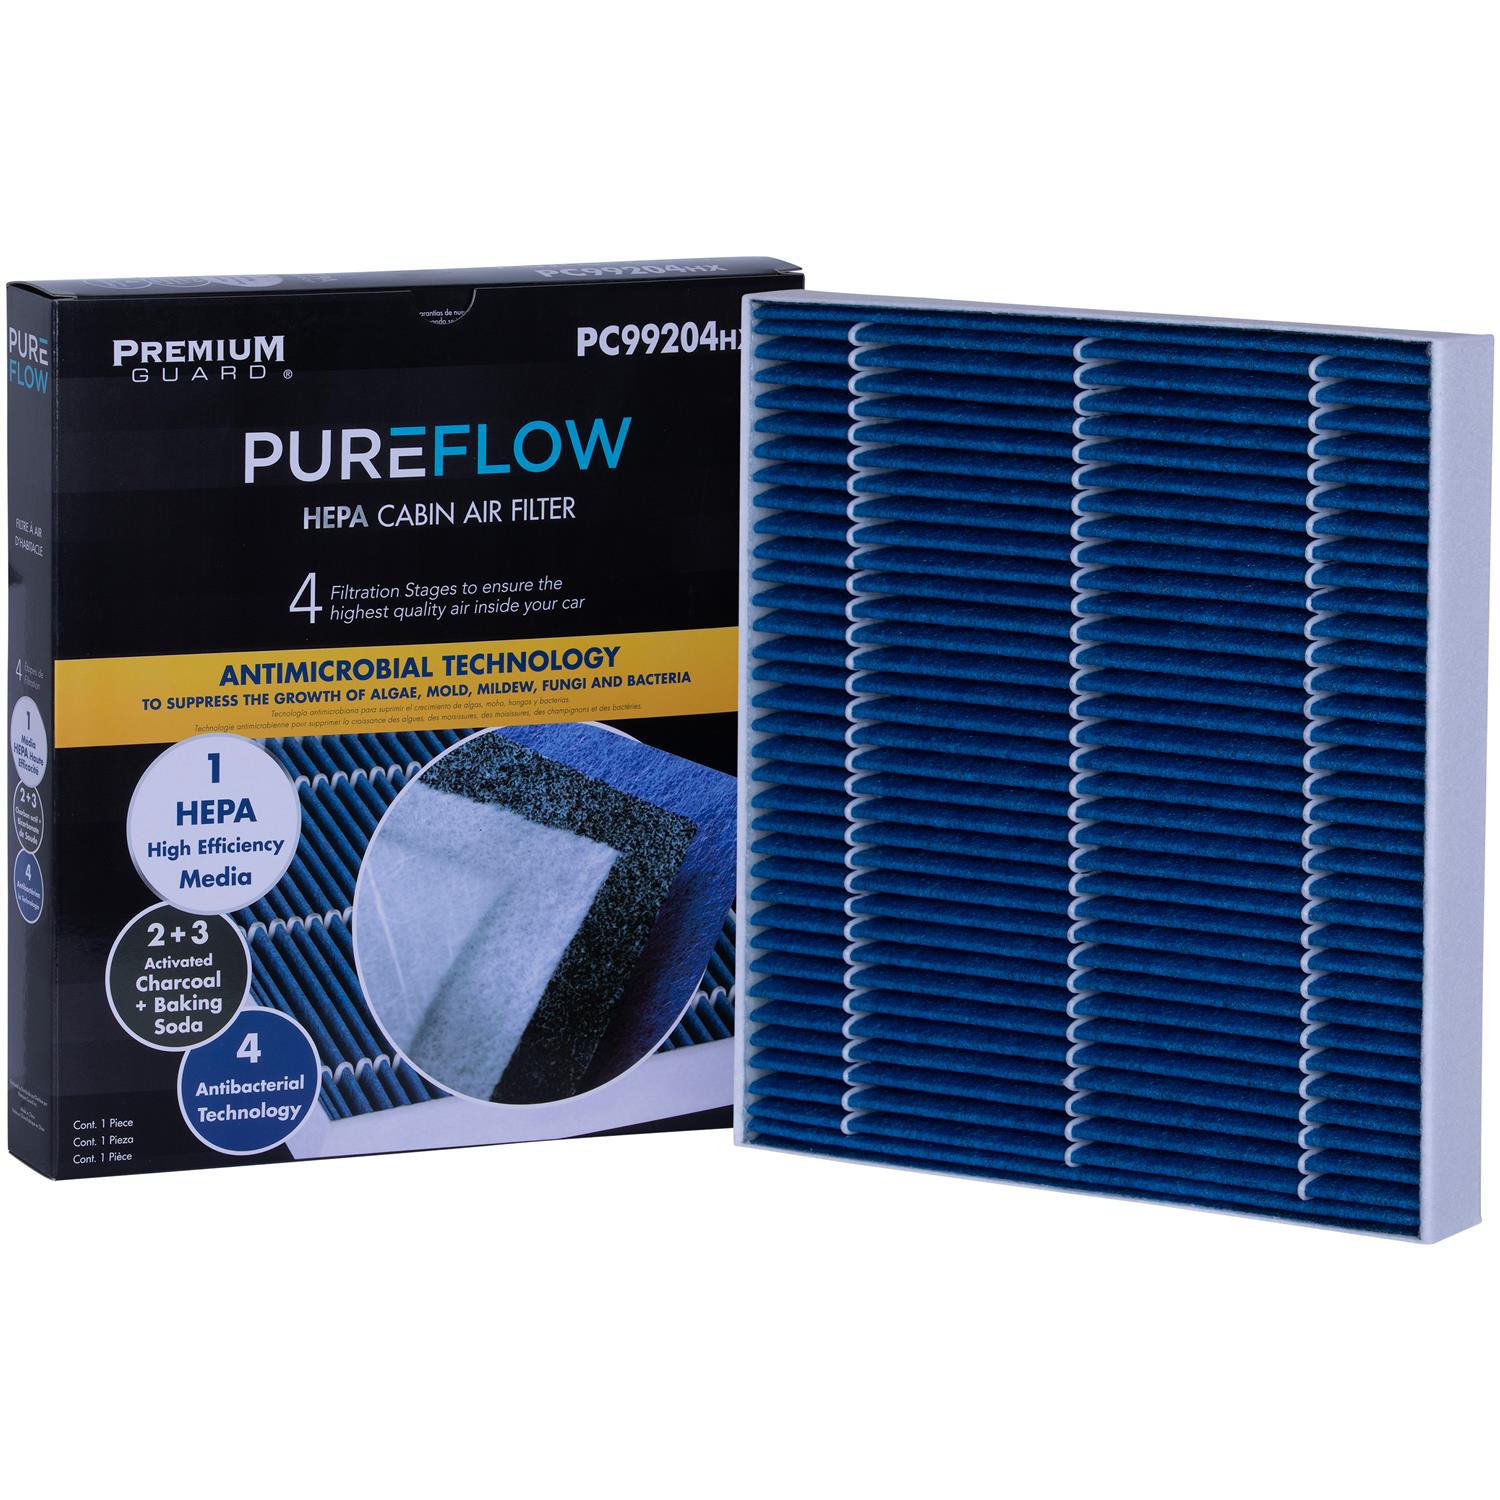 PUREFLOW 2019 Volkswagen Golf R Cabin Air Filter with HEPA and Antibacterial Technology, PC99204HX